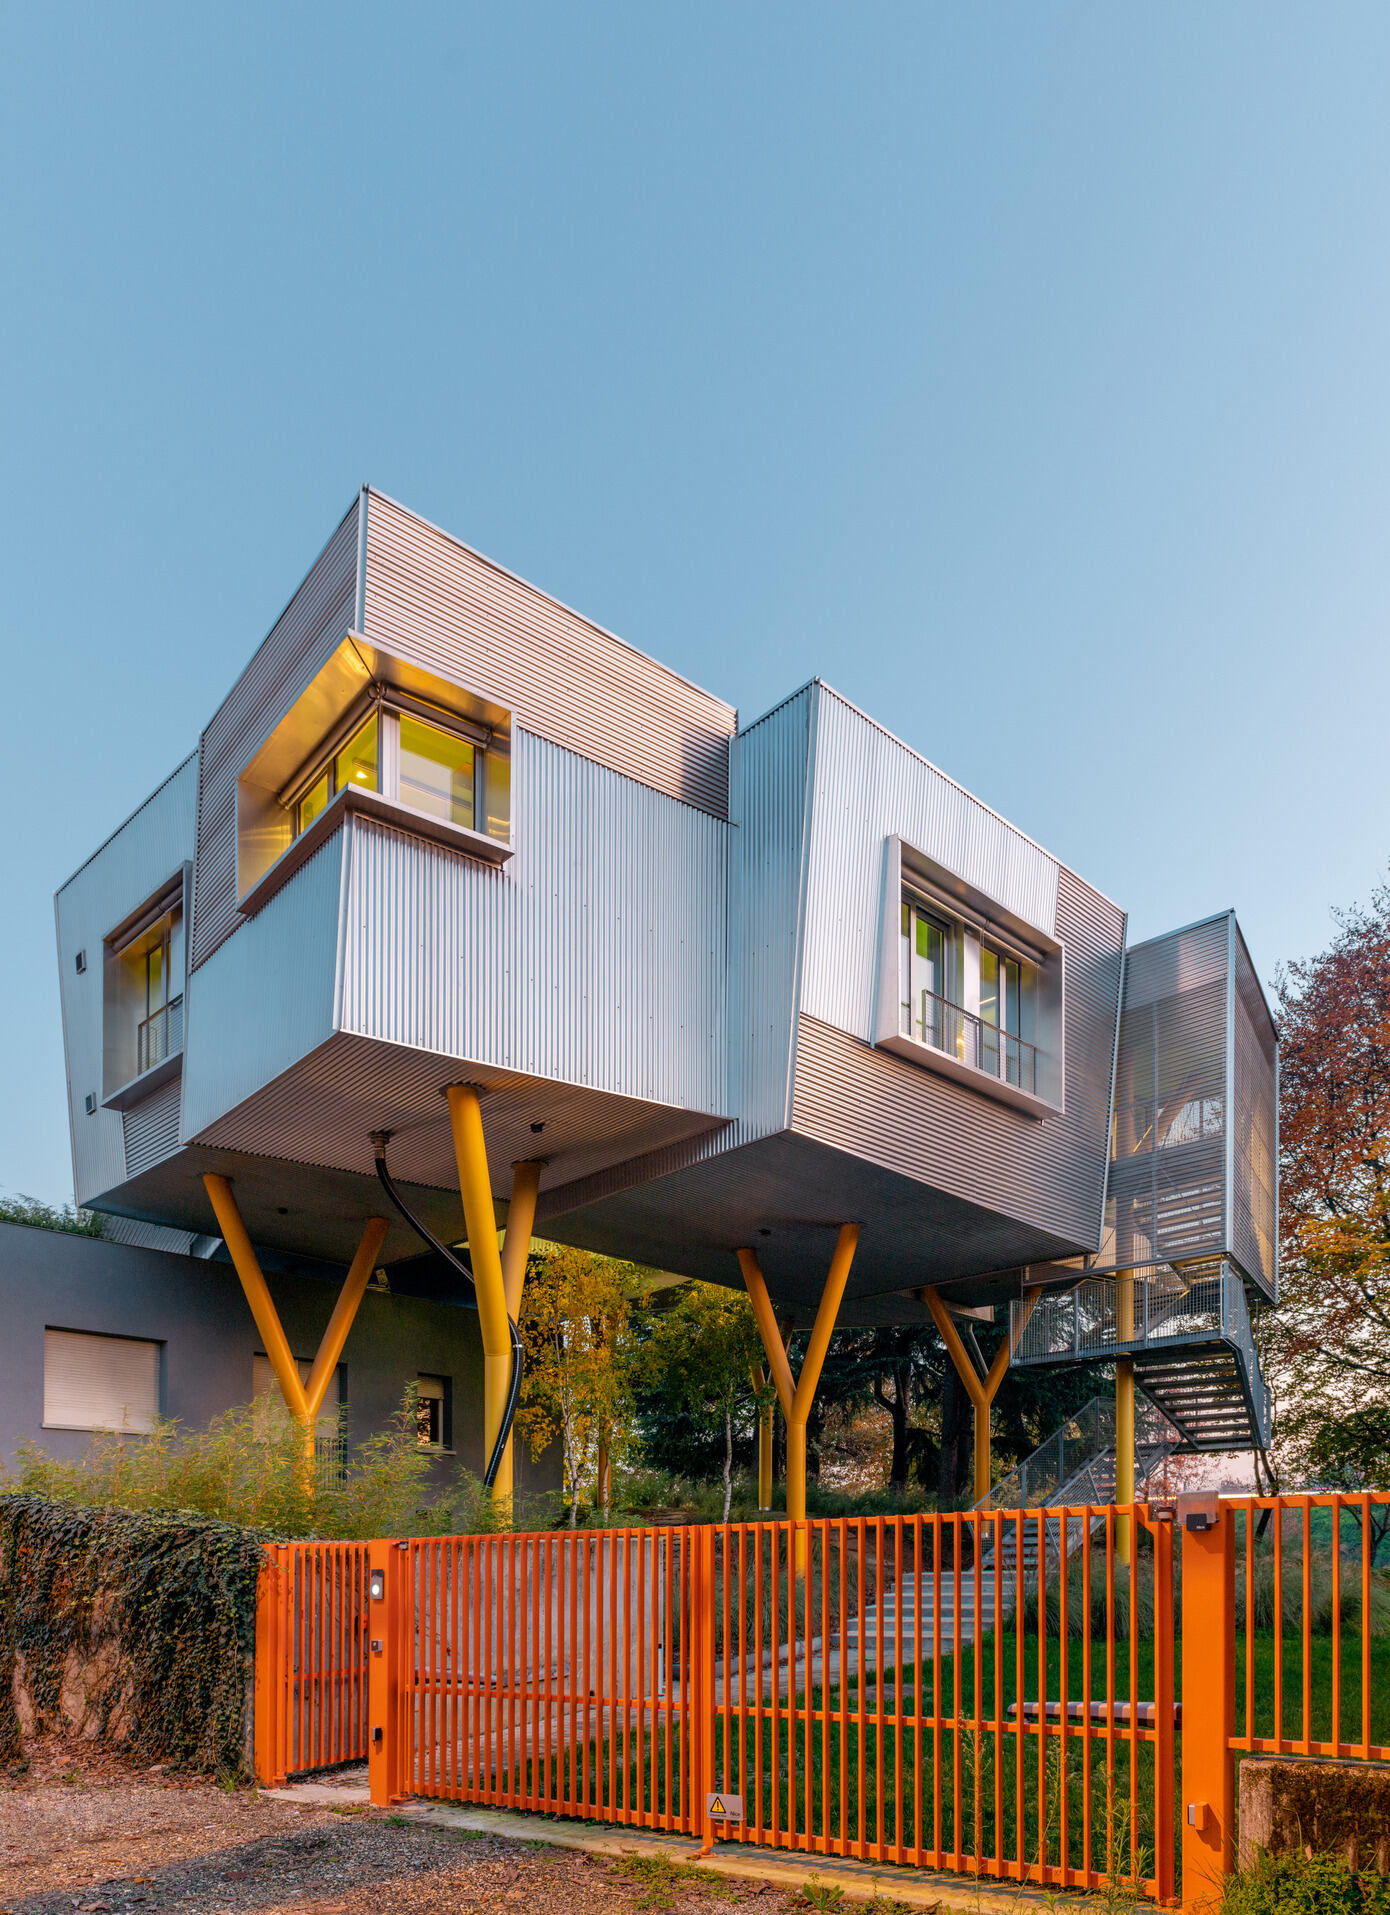 The Hole with the House Around: Italy’s Elevated Home by Elasticofarm